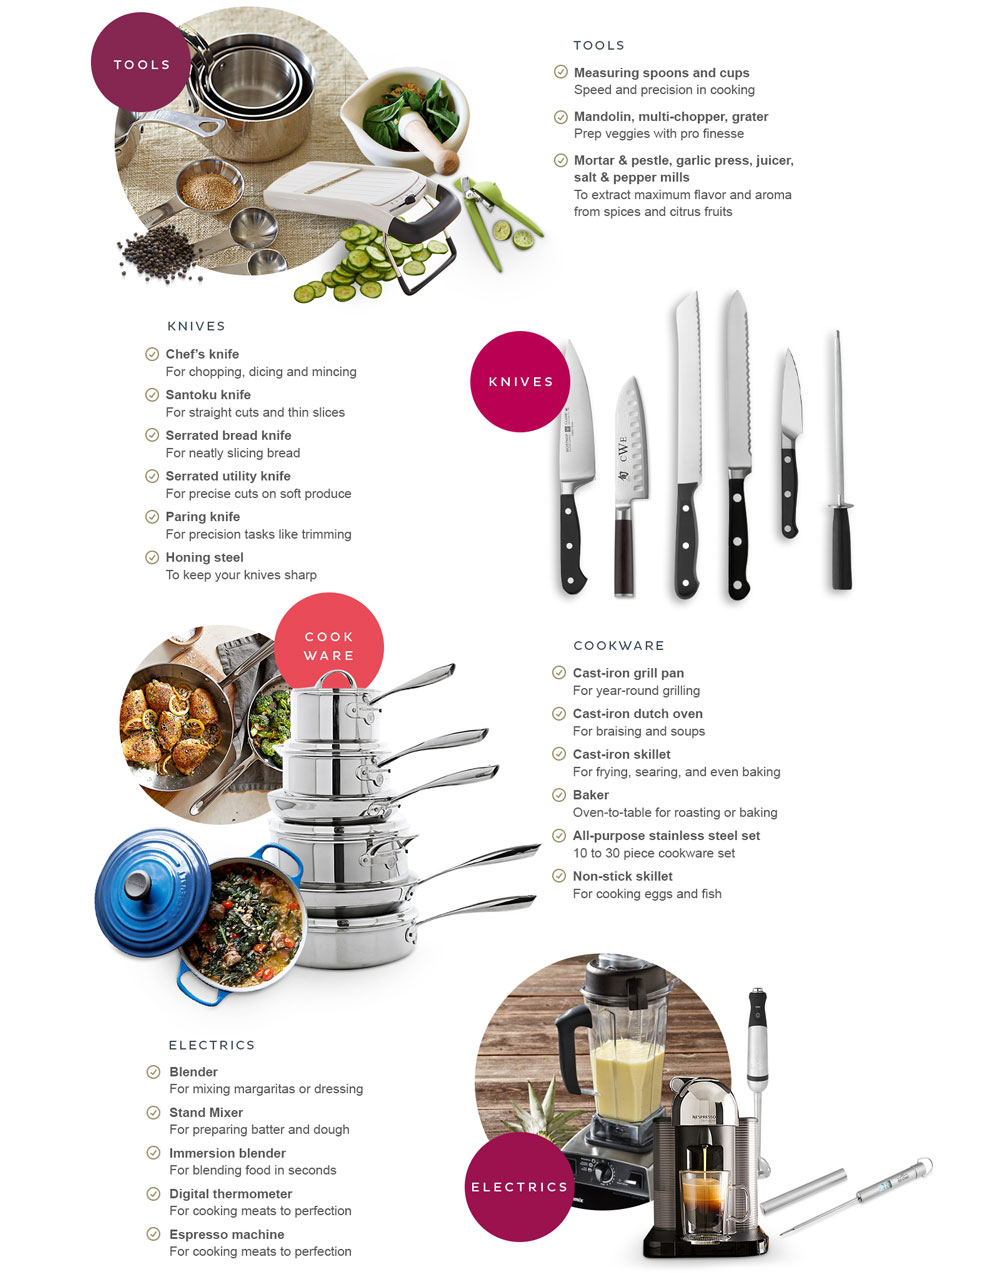 Williams-Sonoma wedding gifts for a well equipped kitchen